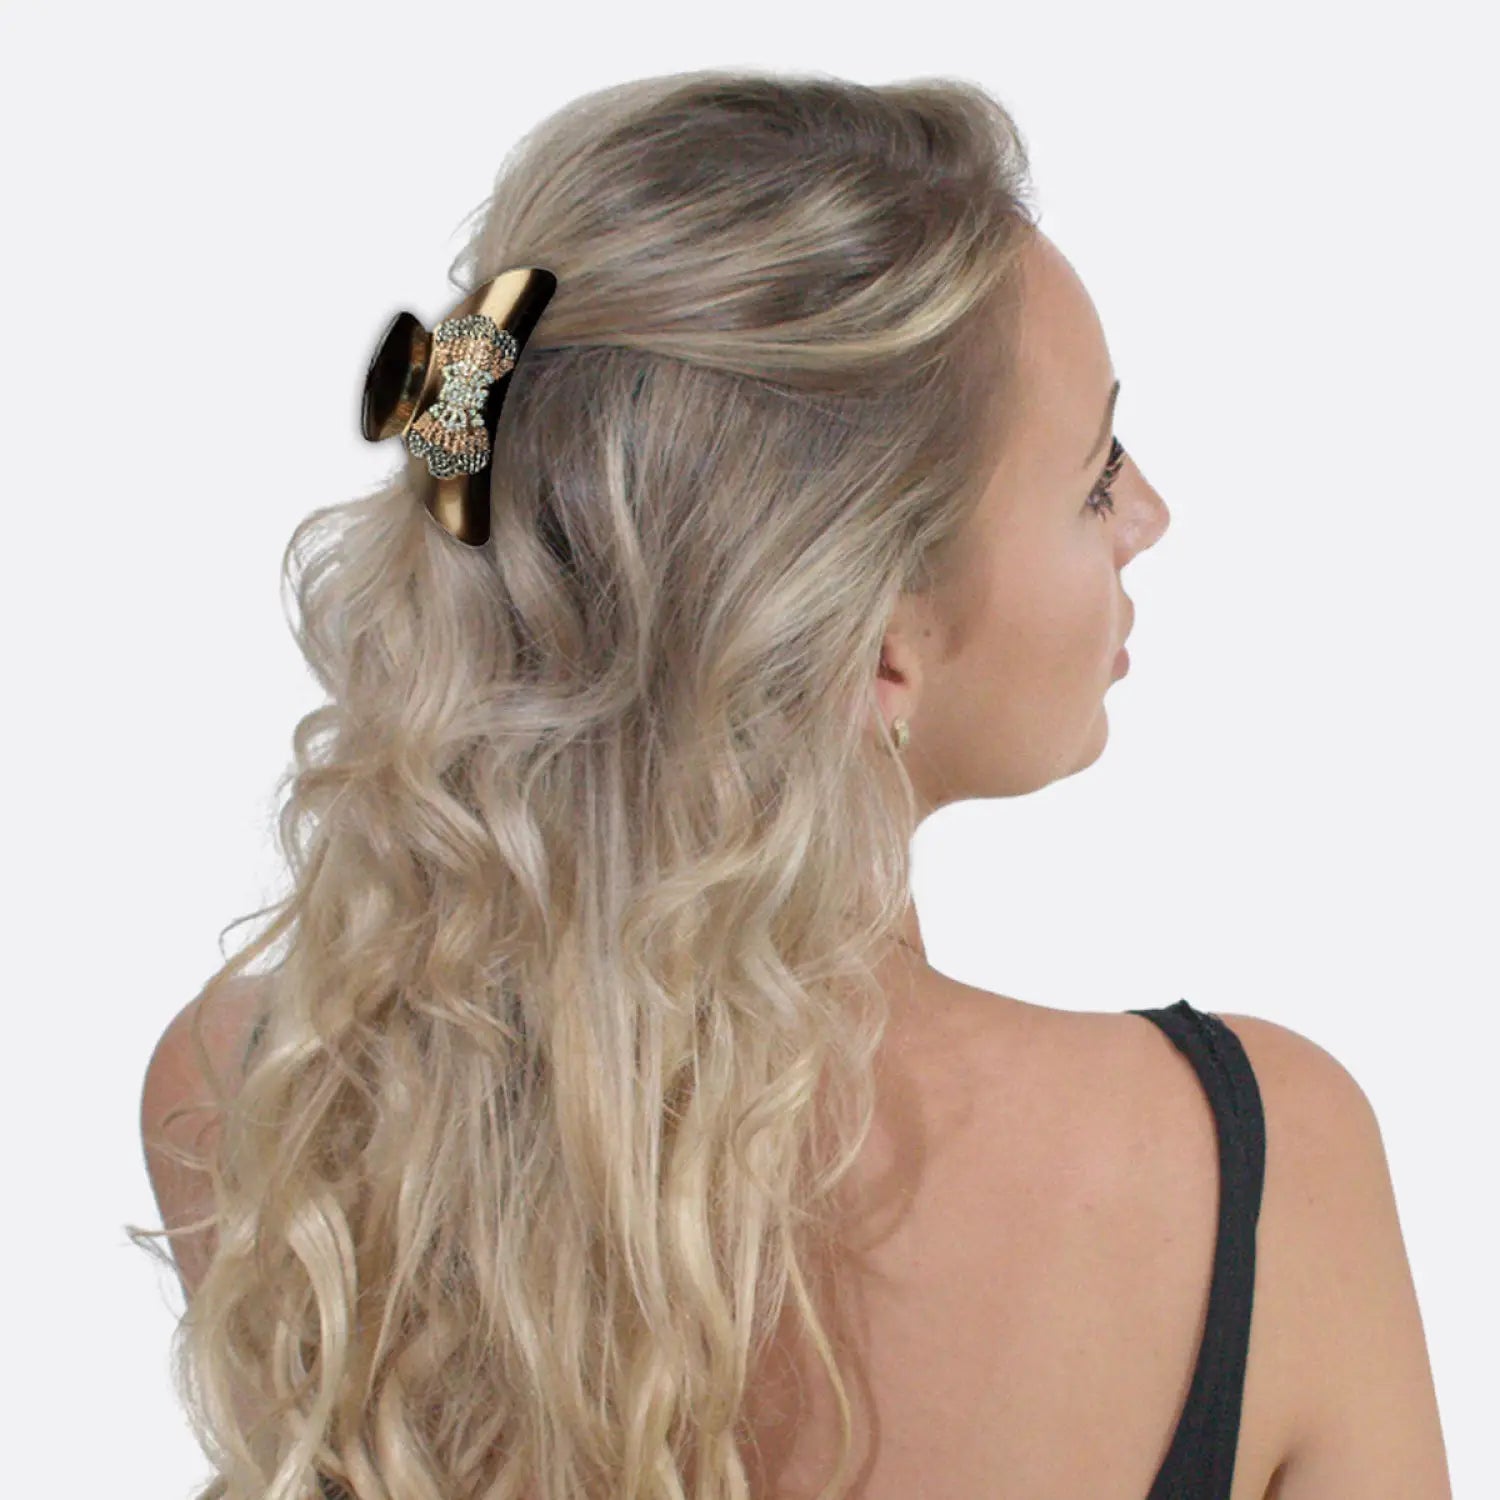 Blonde woman in black top with gold hair clip - Glamorous Rhinestone Butterfly Hair Clamps